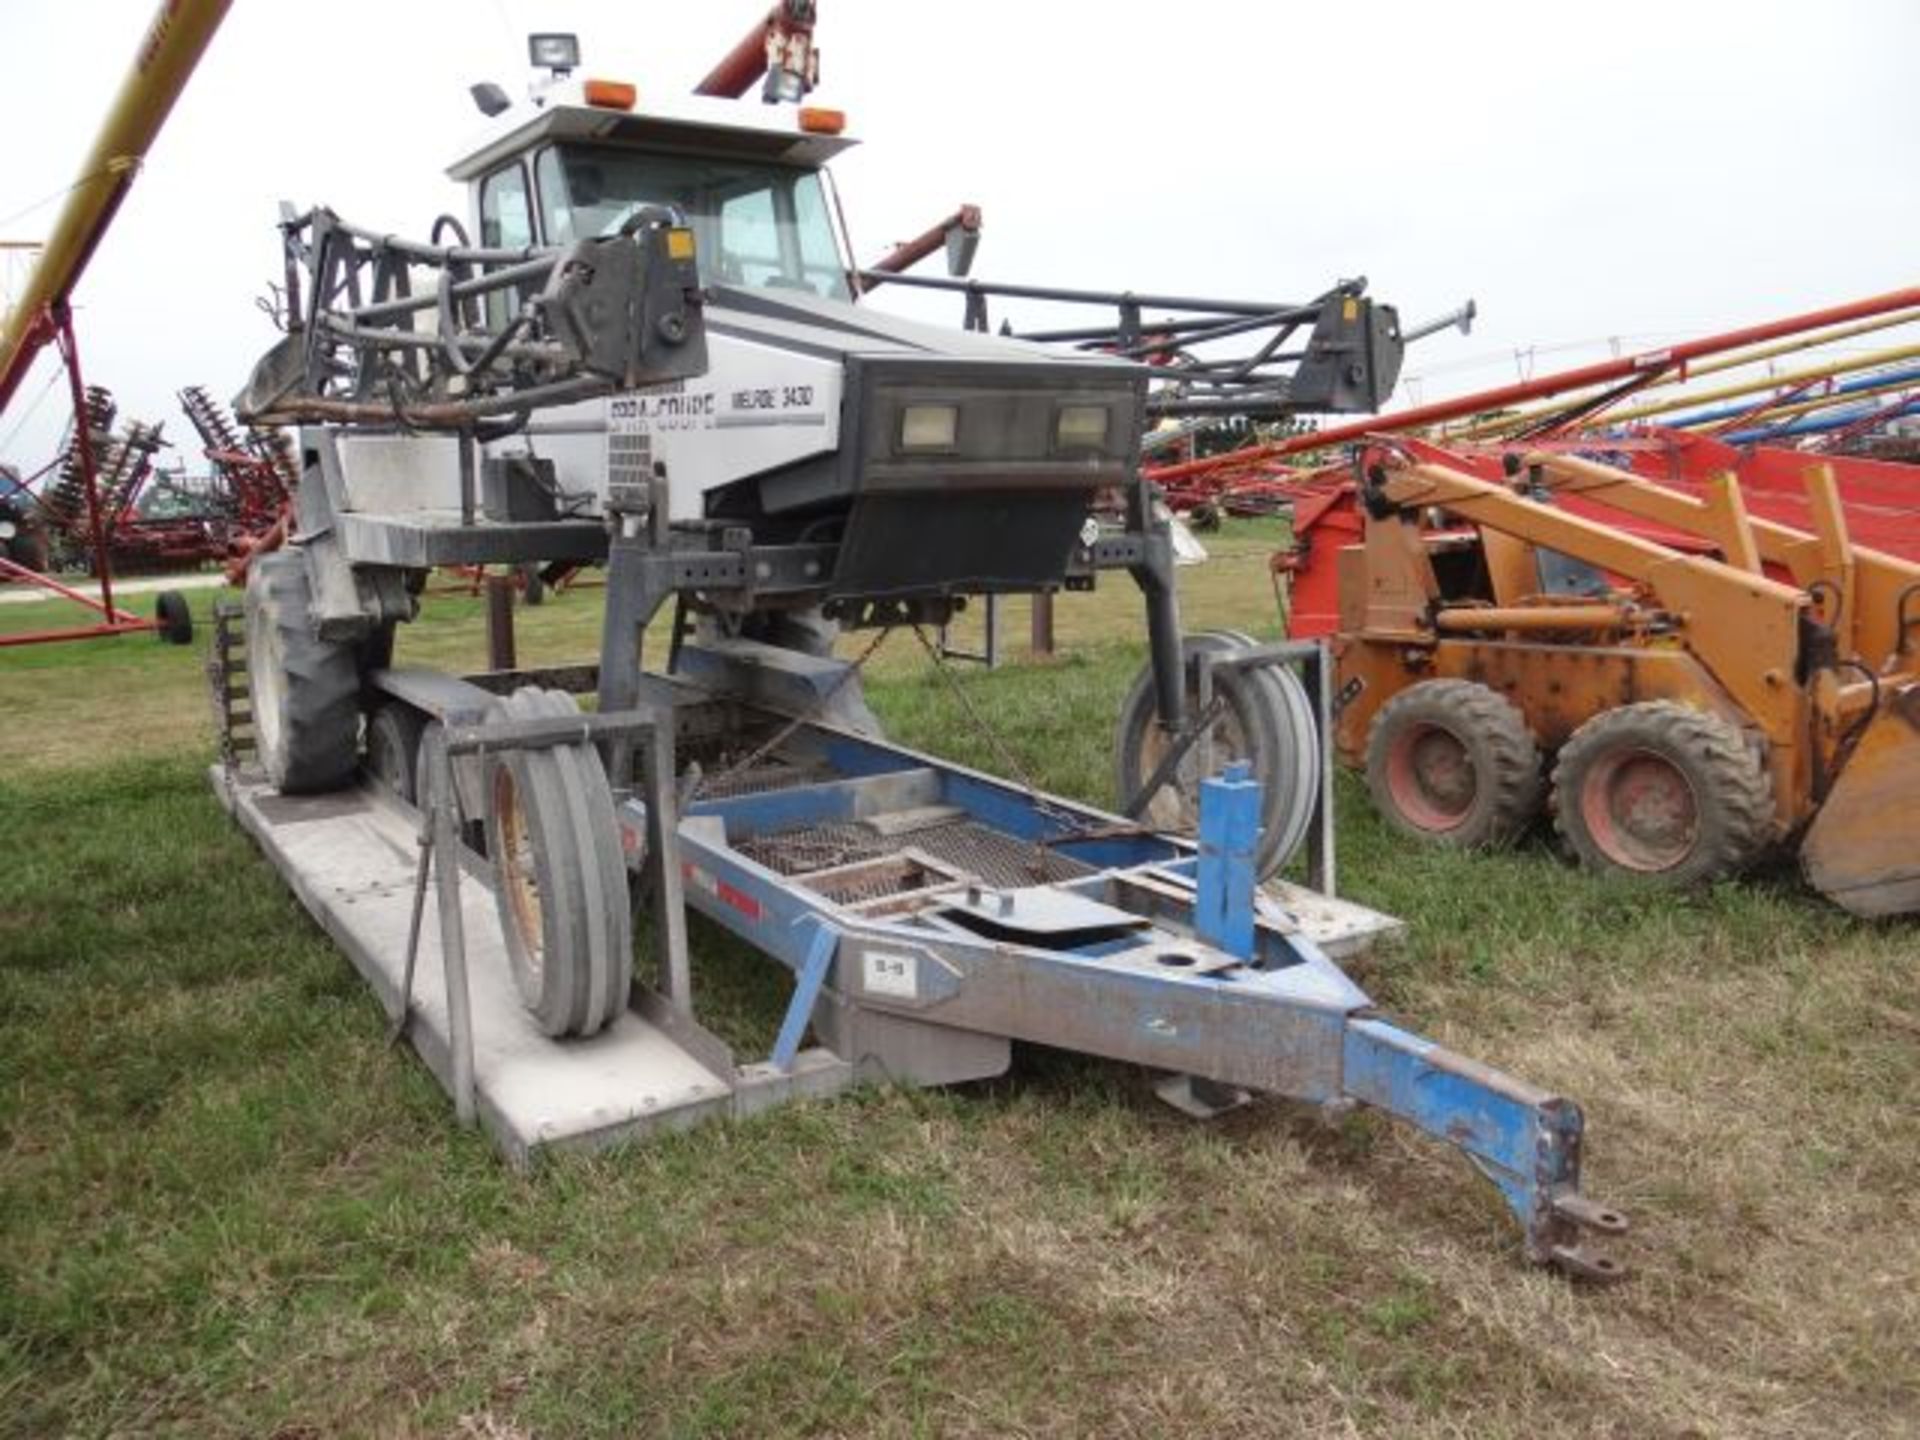 Spra Coupe 3440 Sprayer 60' Booms, T-Jet Nozzles, Raven 440 Monitor, w/20' Tandem Axle Trailer, - Image 2 of 3